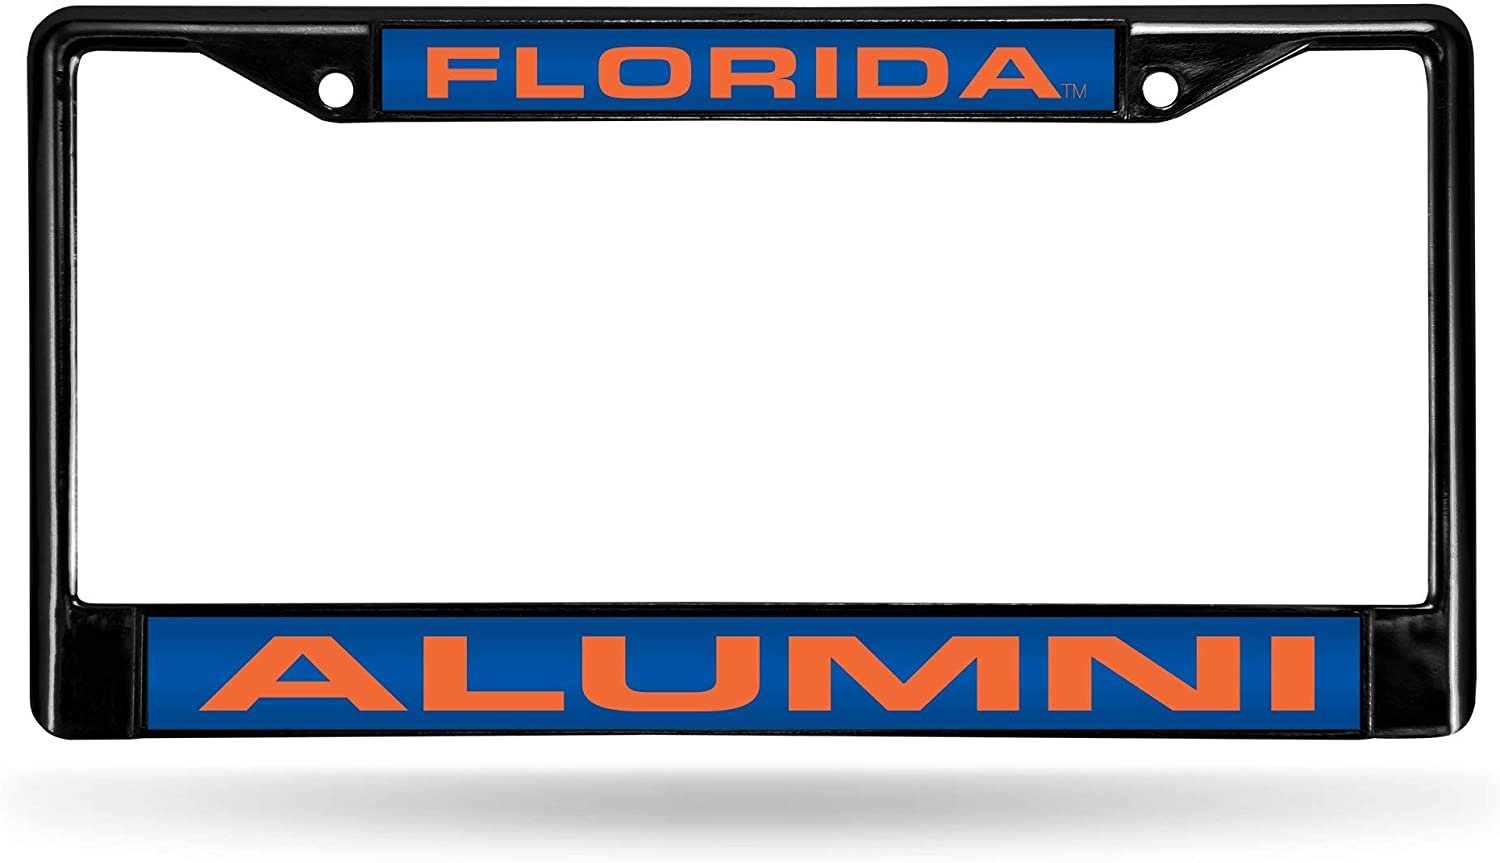 University of Florida Gators Black Metal License Plate Frame Tag Cover, Laser Acrylic Mirrored Inserts, 12x6 Inch